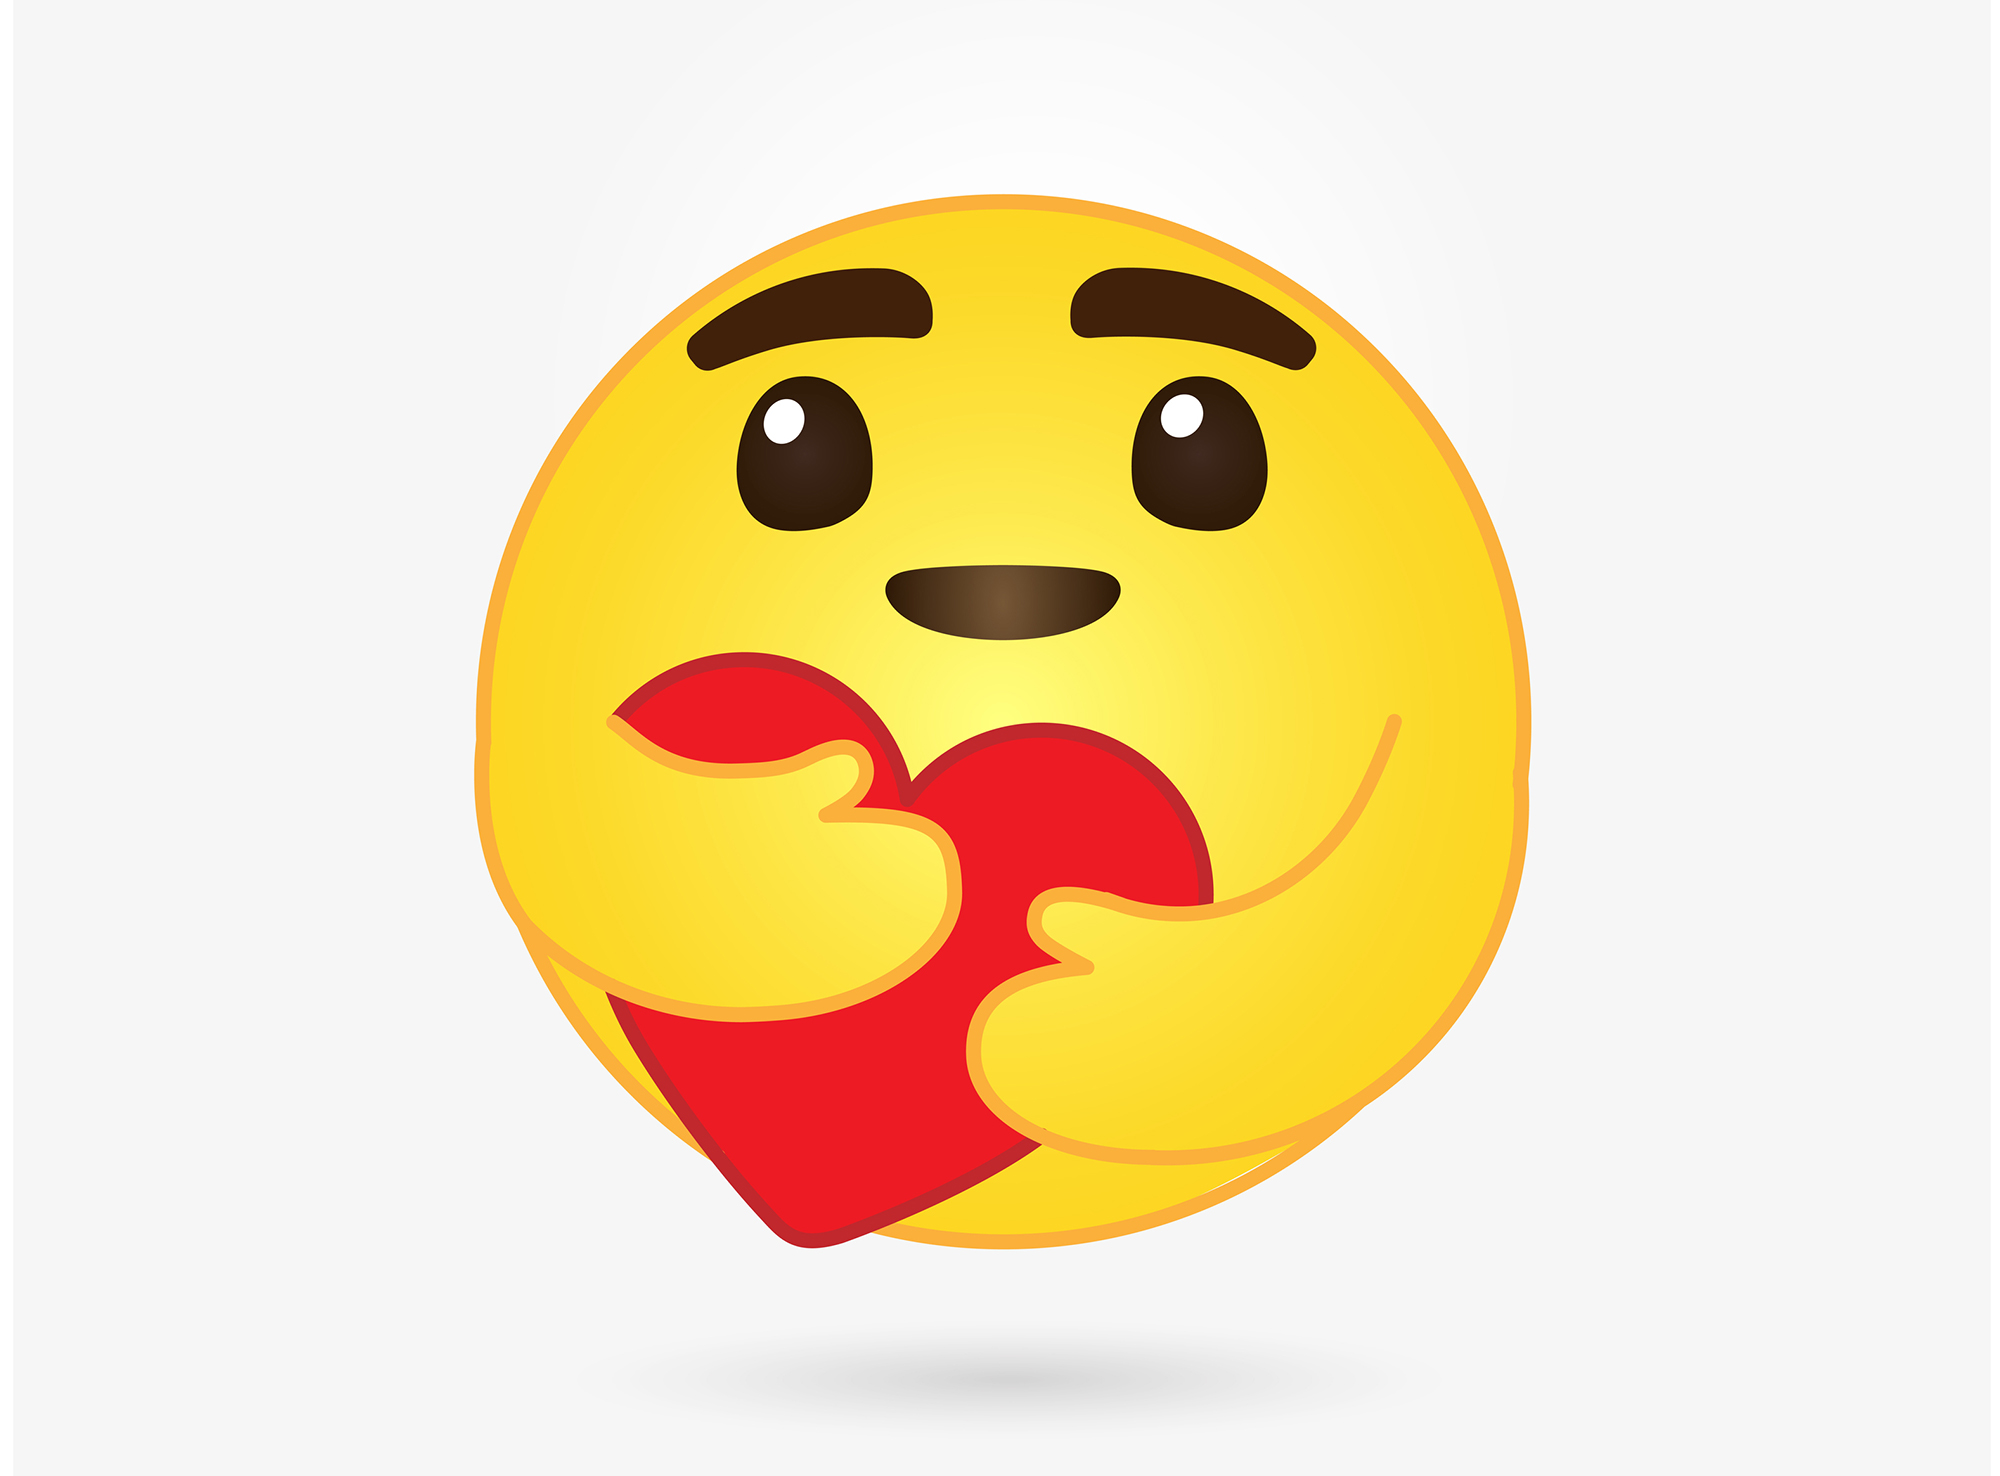 Care by Emoji - Anthropology News